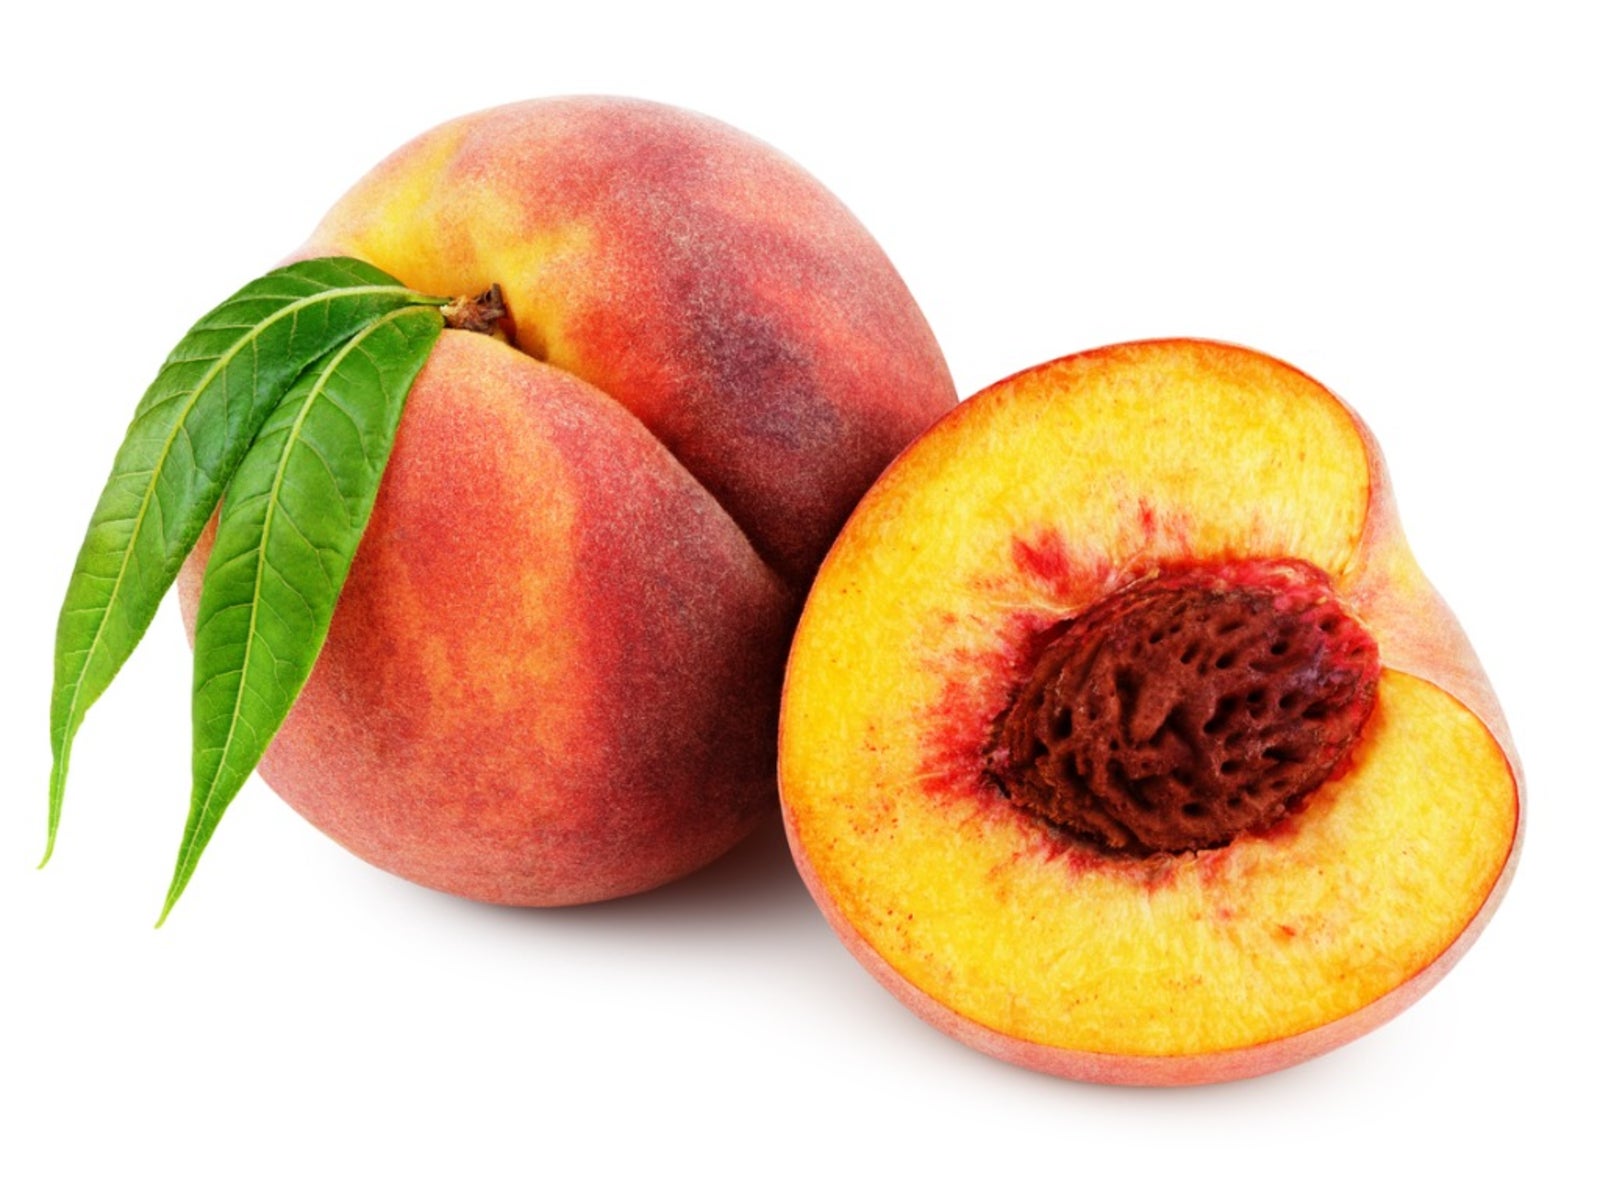 Plant A Peach Pit: Growing Peaches From Seed